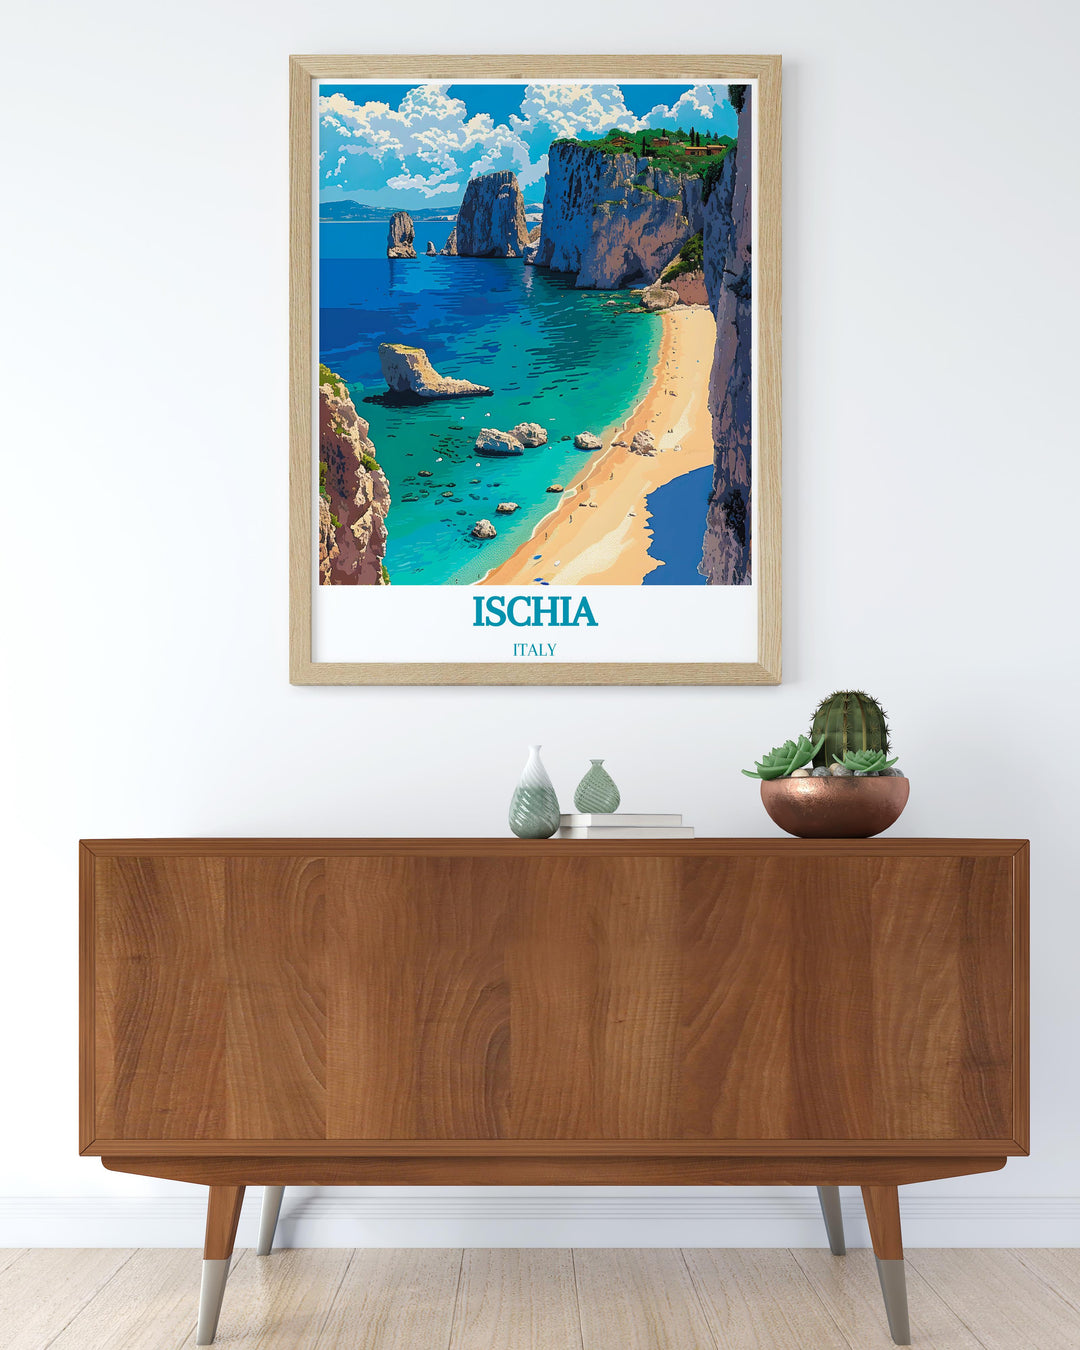 Poster of Ischias iconic landscapes with clear blue waters and lush greenery ideal for adding a touch of nature to any room